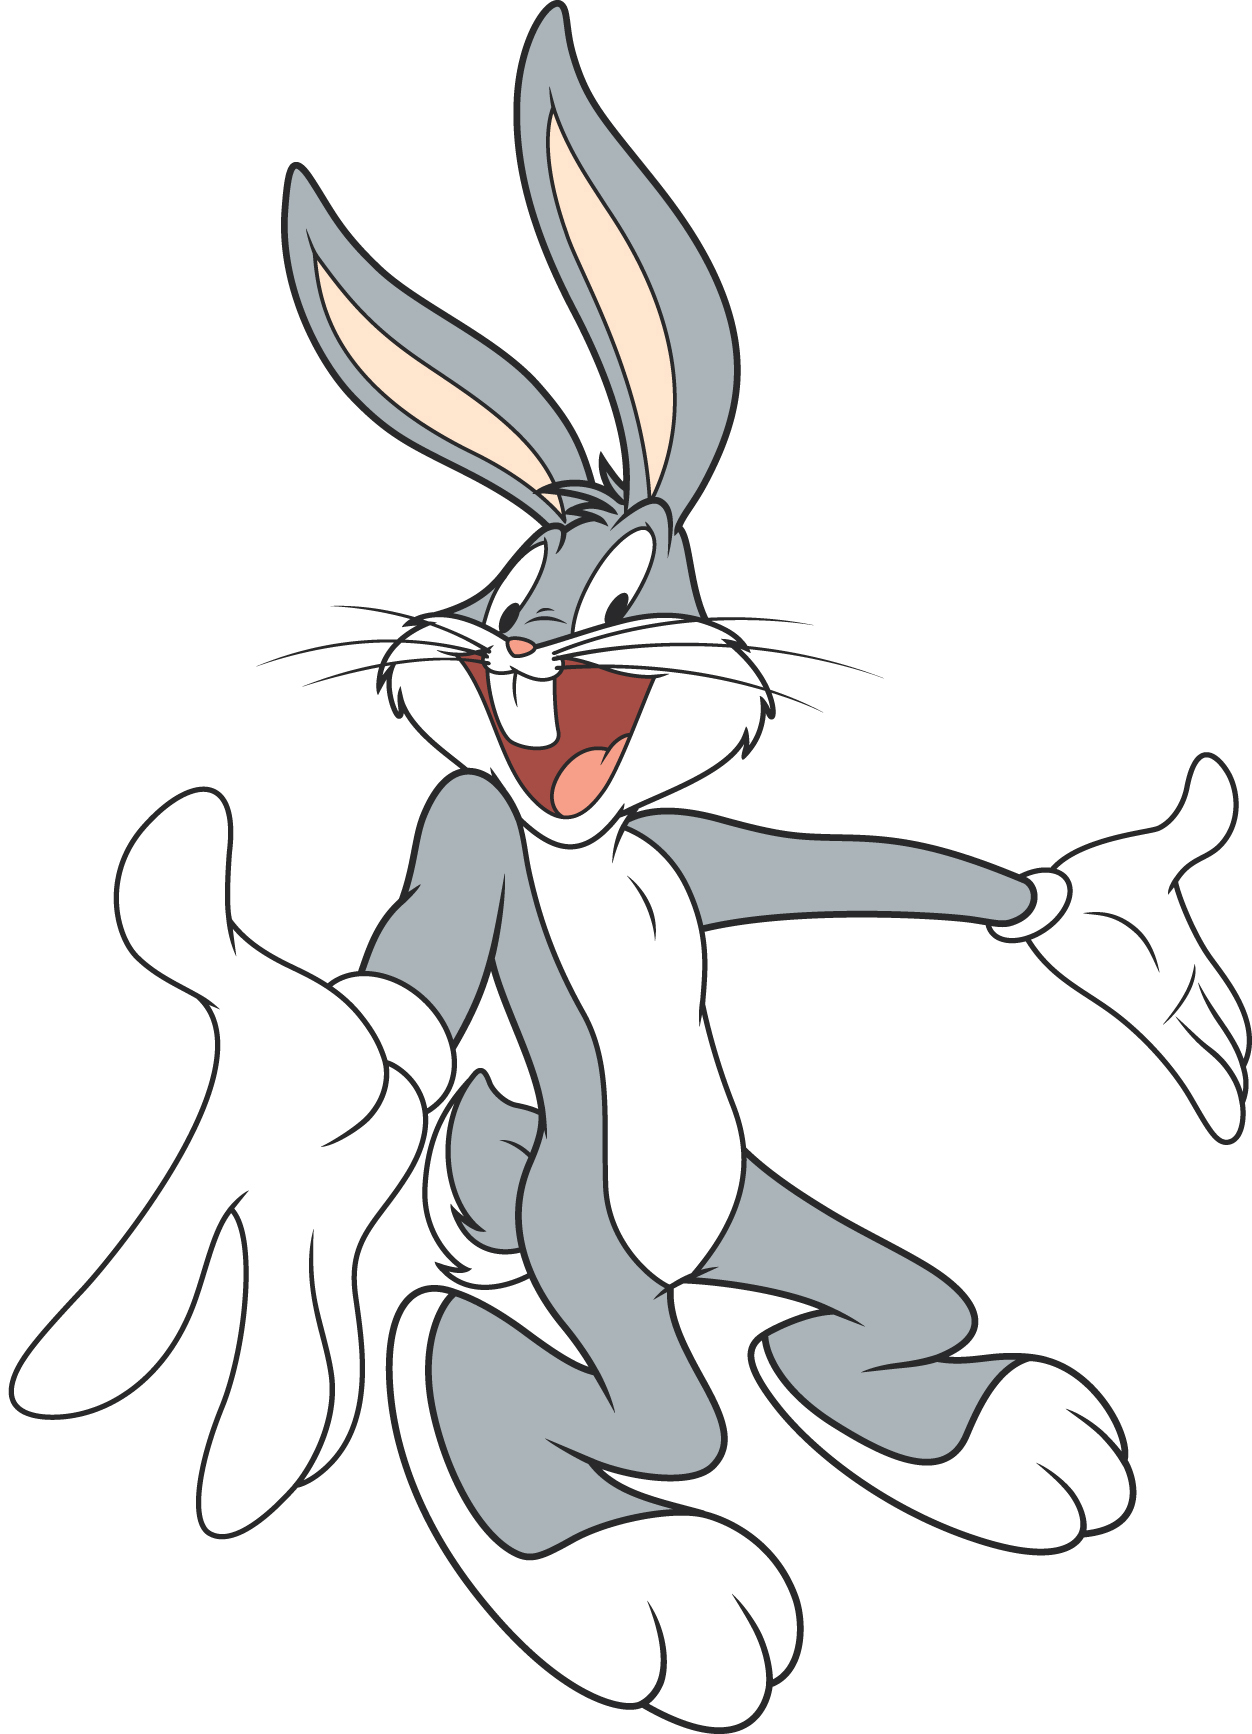 Bugs Bunny is a cartoon character created by Leon Schlesinger Productions (via www.looneytunes.wikia.com)